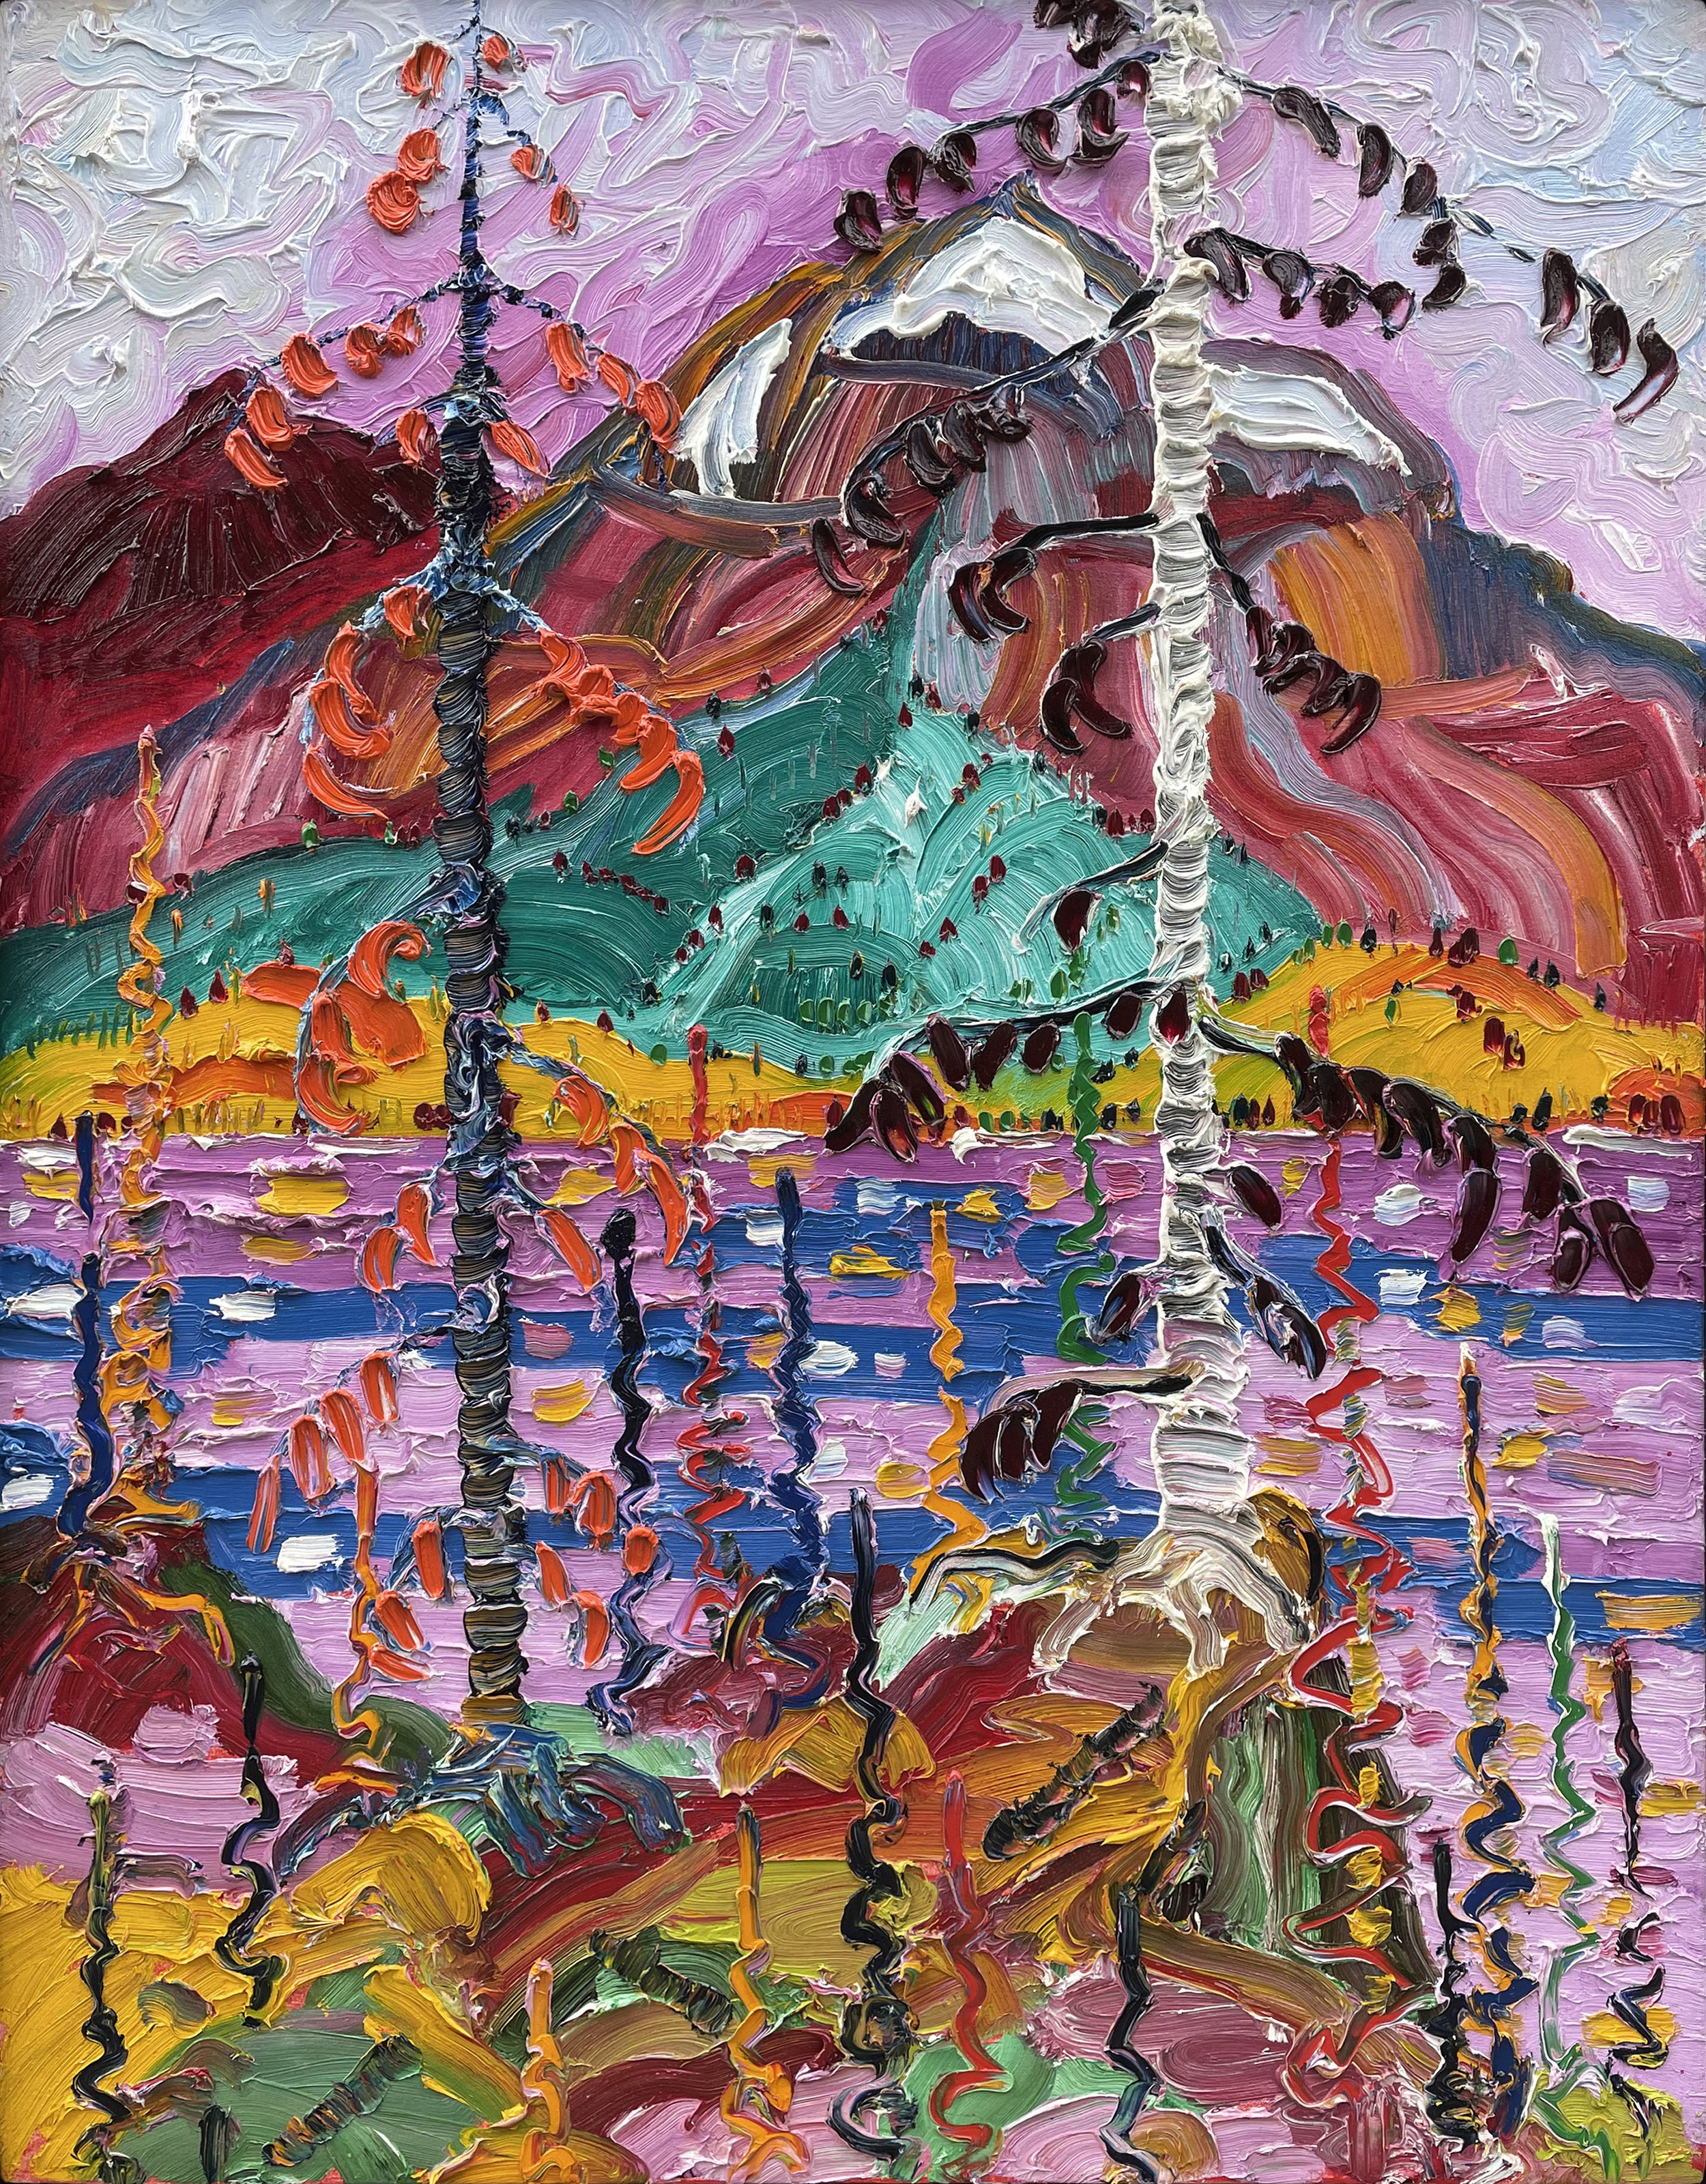 Violet Shine, 2004, 30 x 38.25 in, oil on canvas  (sold)